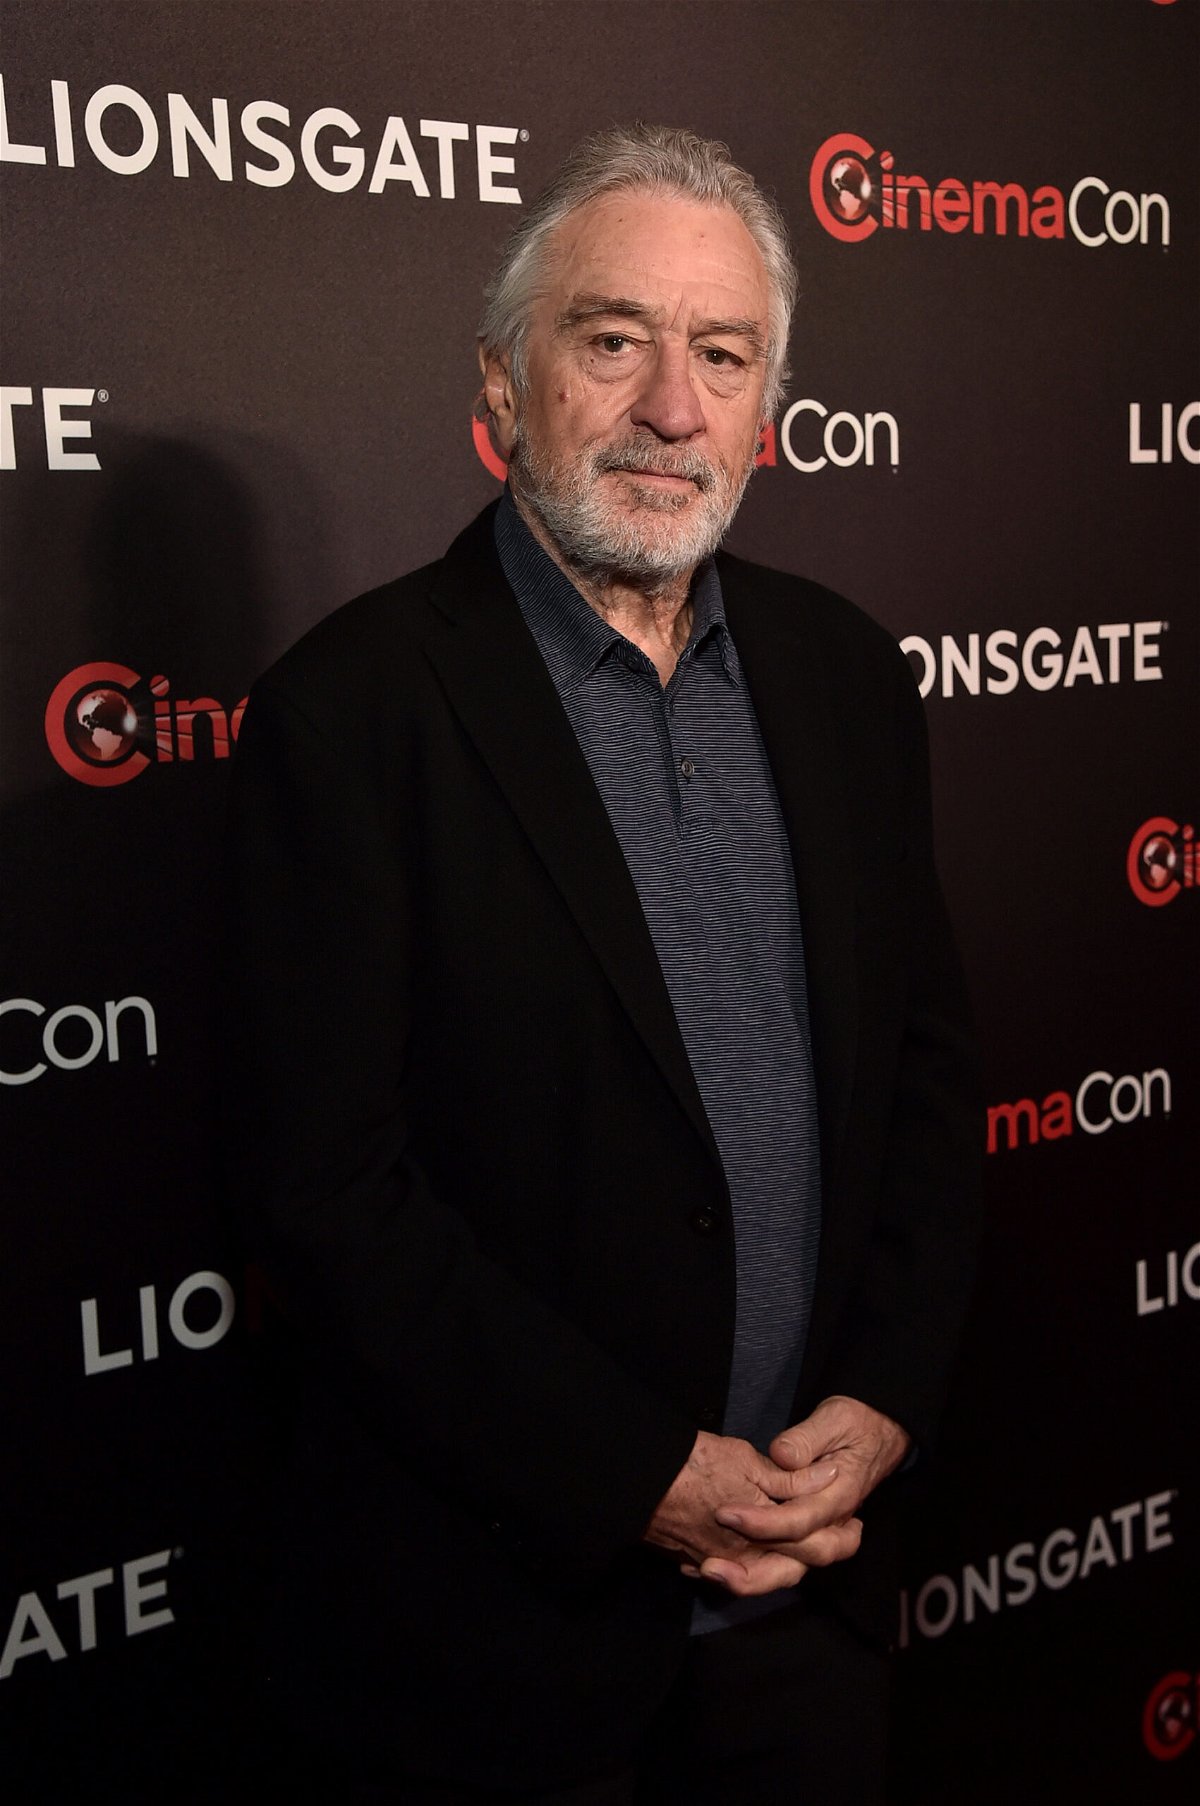 <i>Alberto E. Rodriguez/Getty Images for CinemaCon</i><br/>Police in New York City arrested a woman who broke into Robert De Niro's home on December 19